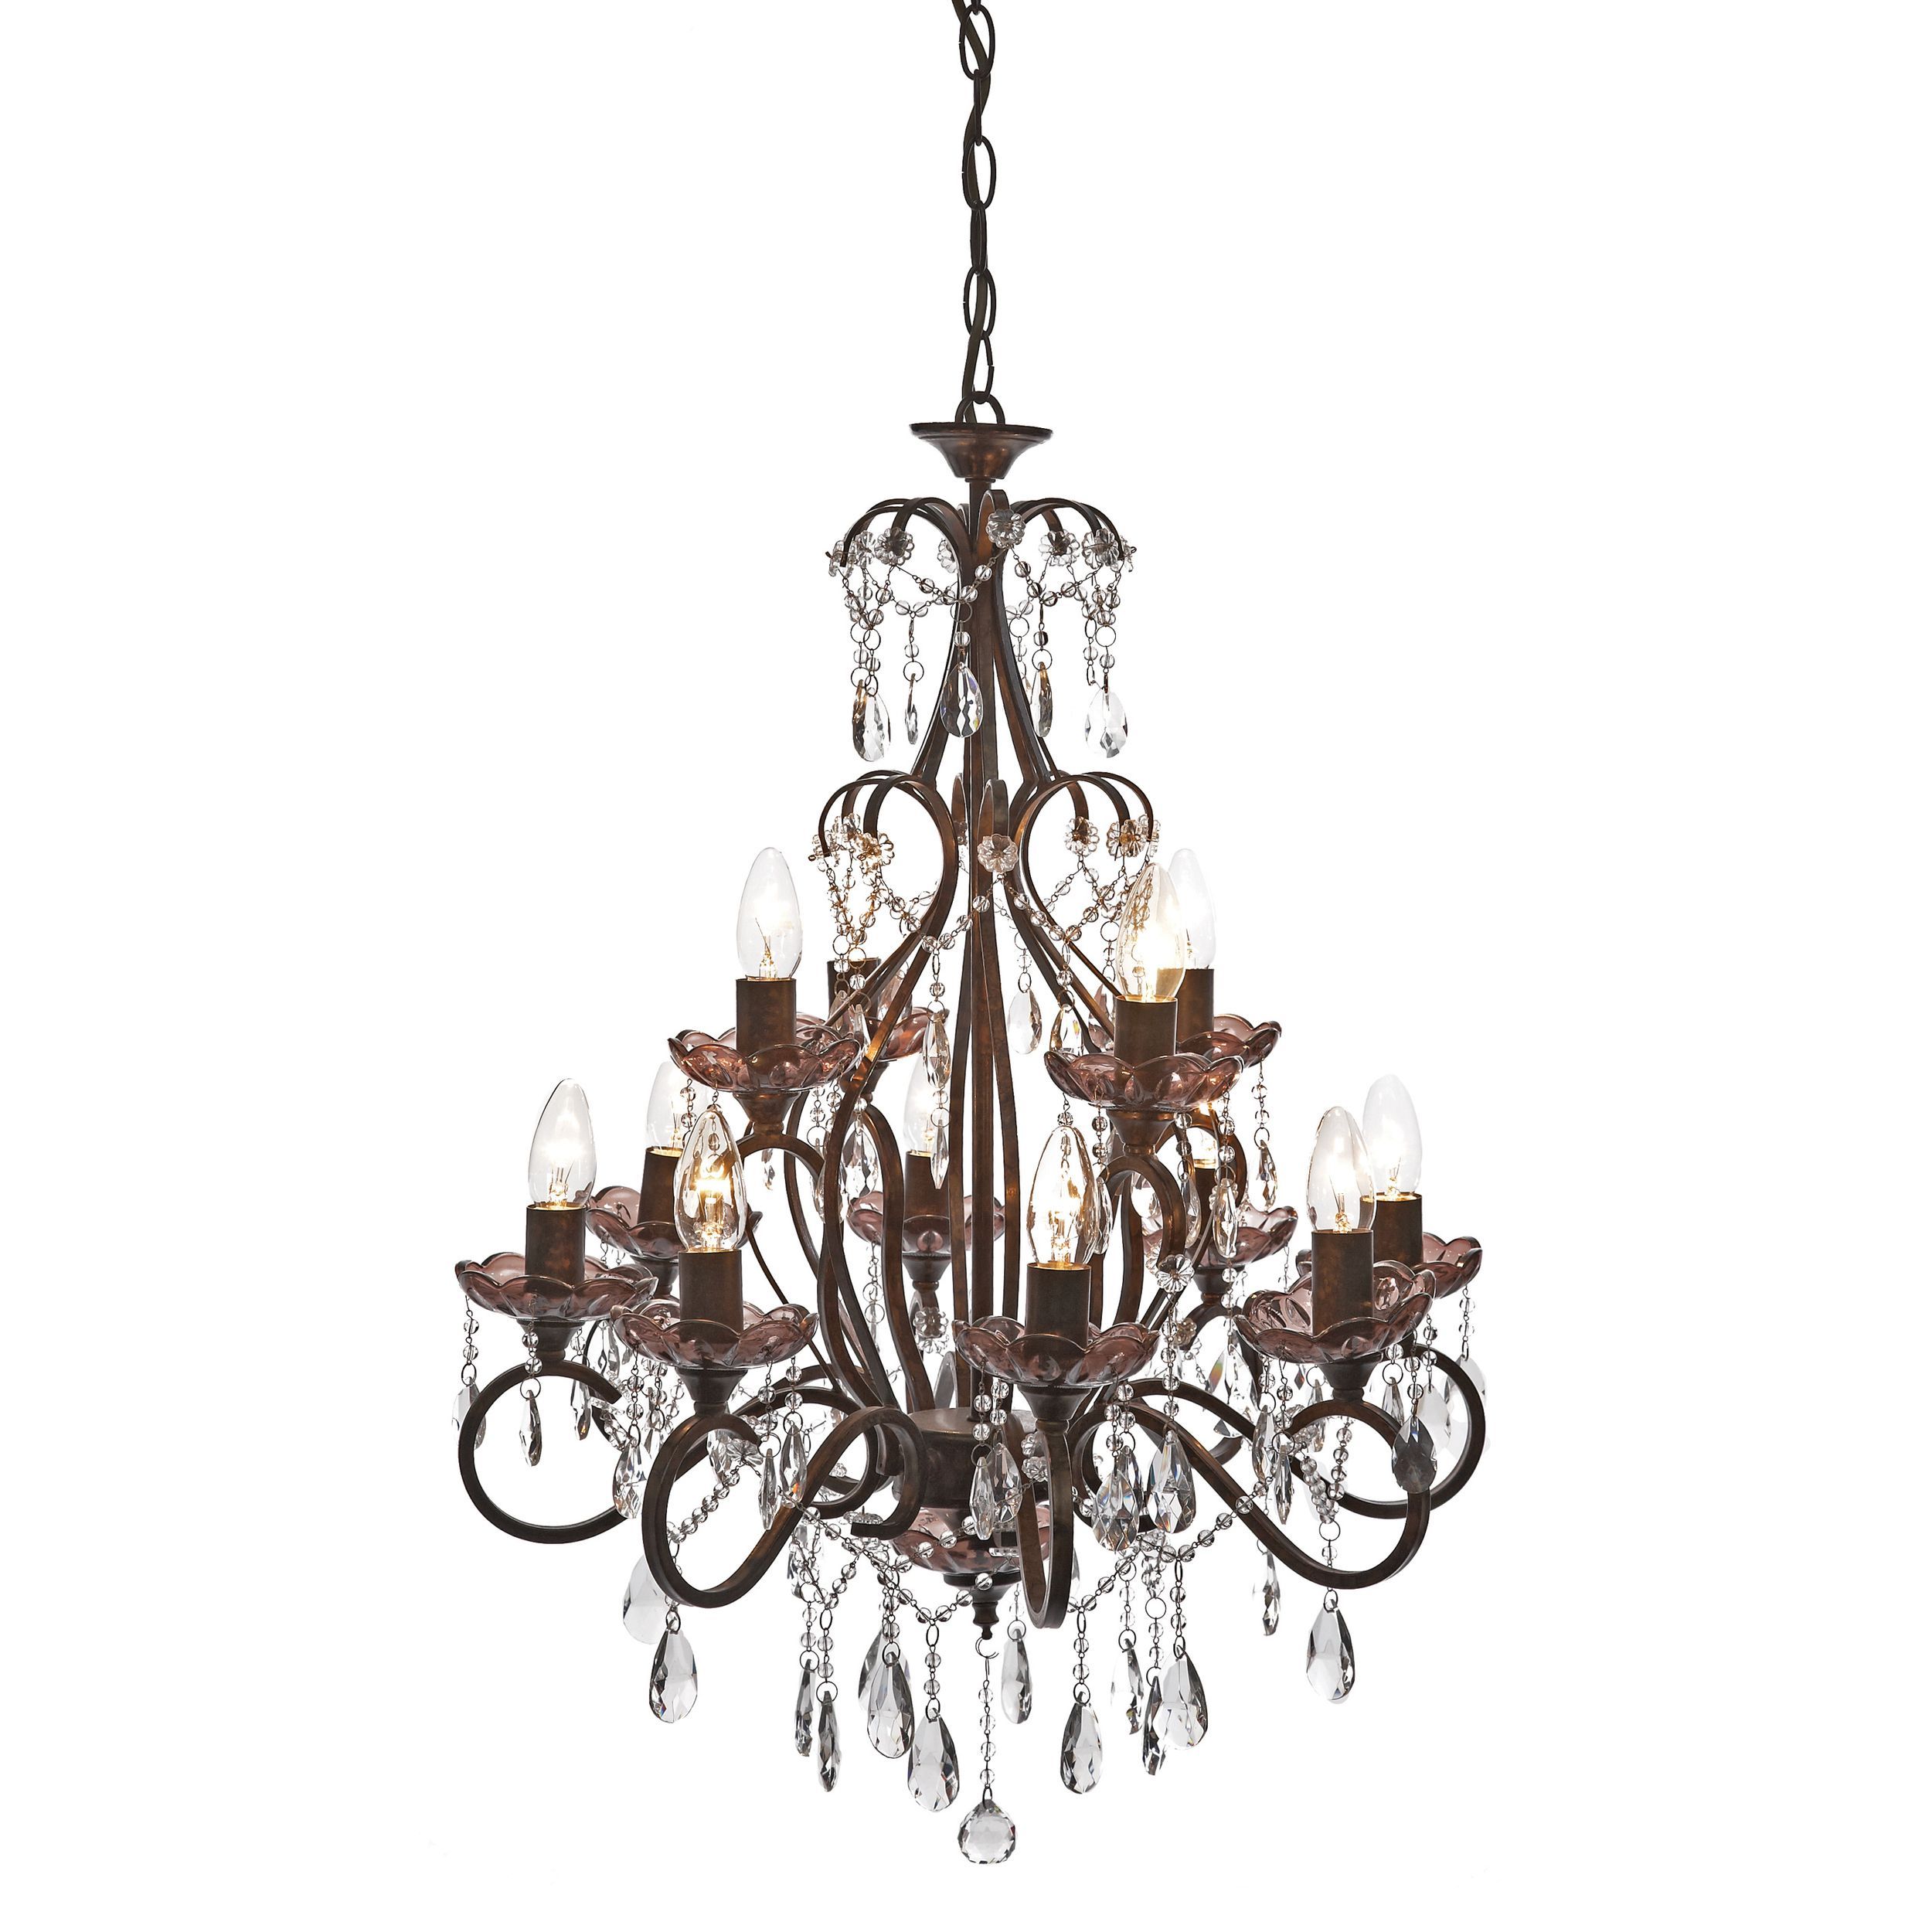 56cm Diameter X 76cm Drop Antique Brass Chandelier Pertaining To Hesse 5 Light Candle Style Chandeliers (View 25 of 30)